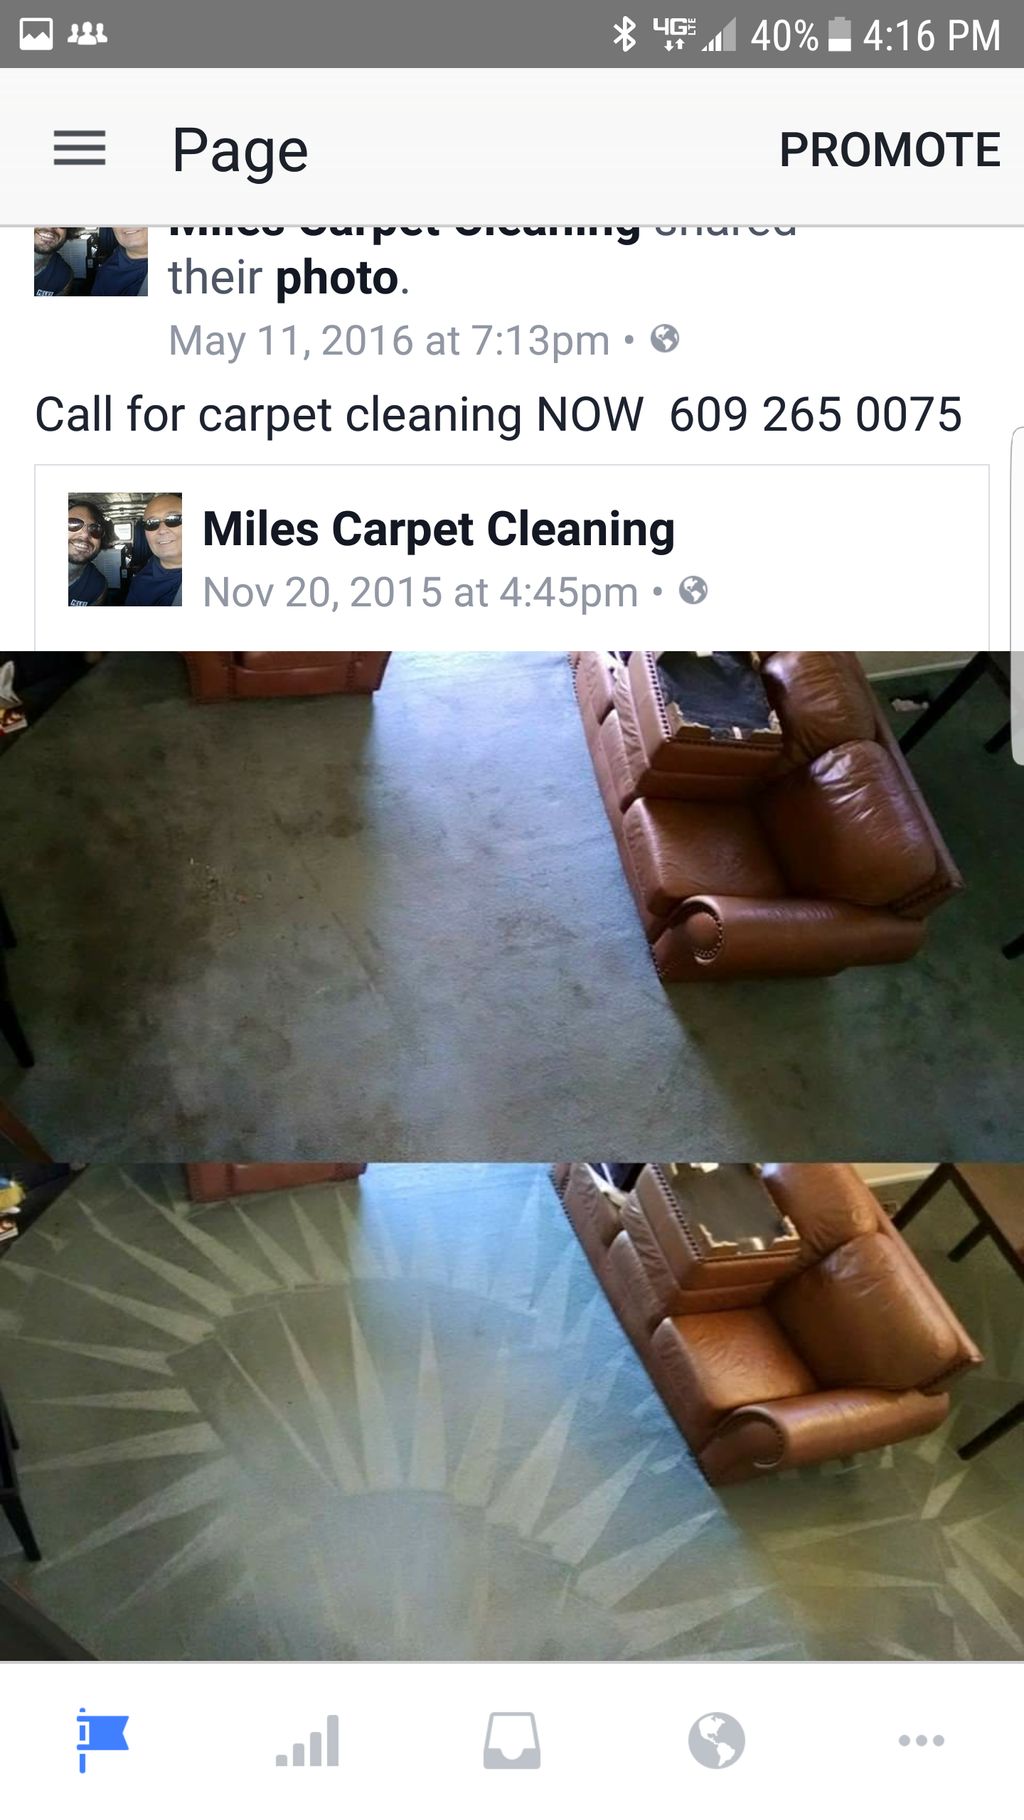 MILES CARPET CLEANING